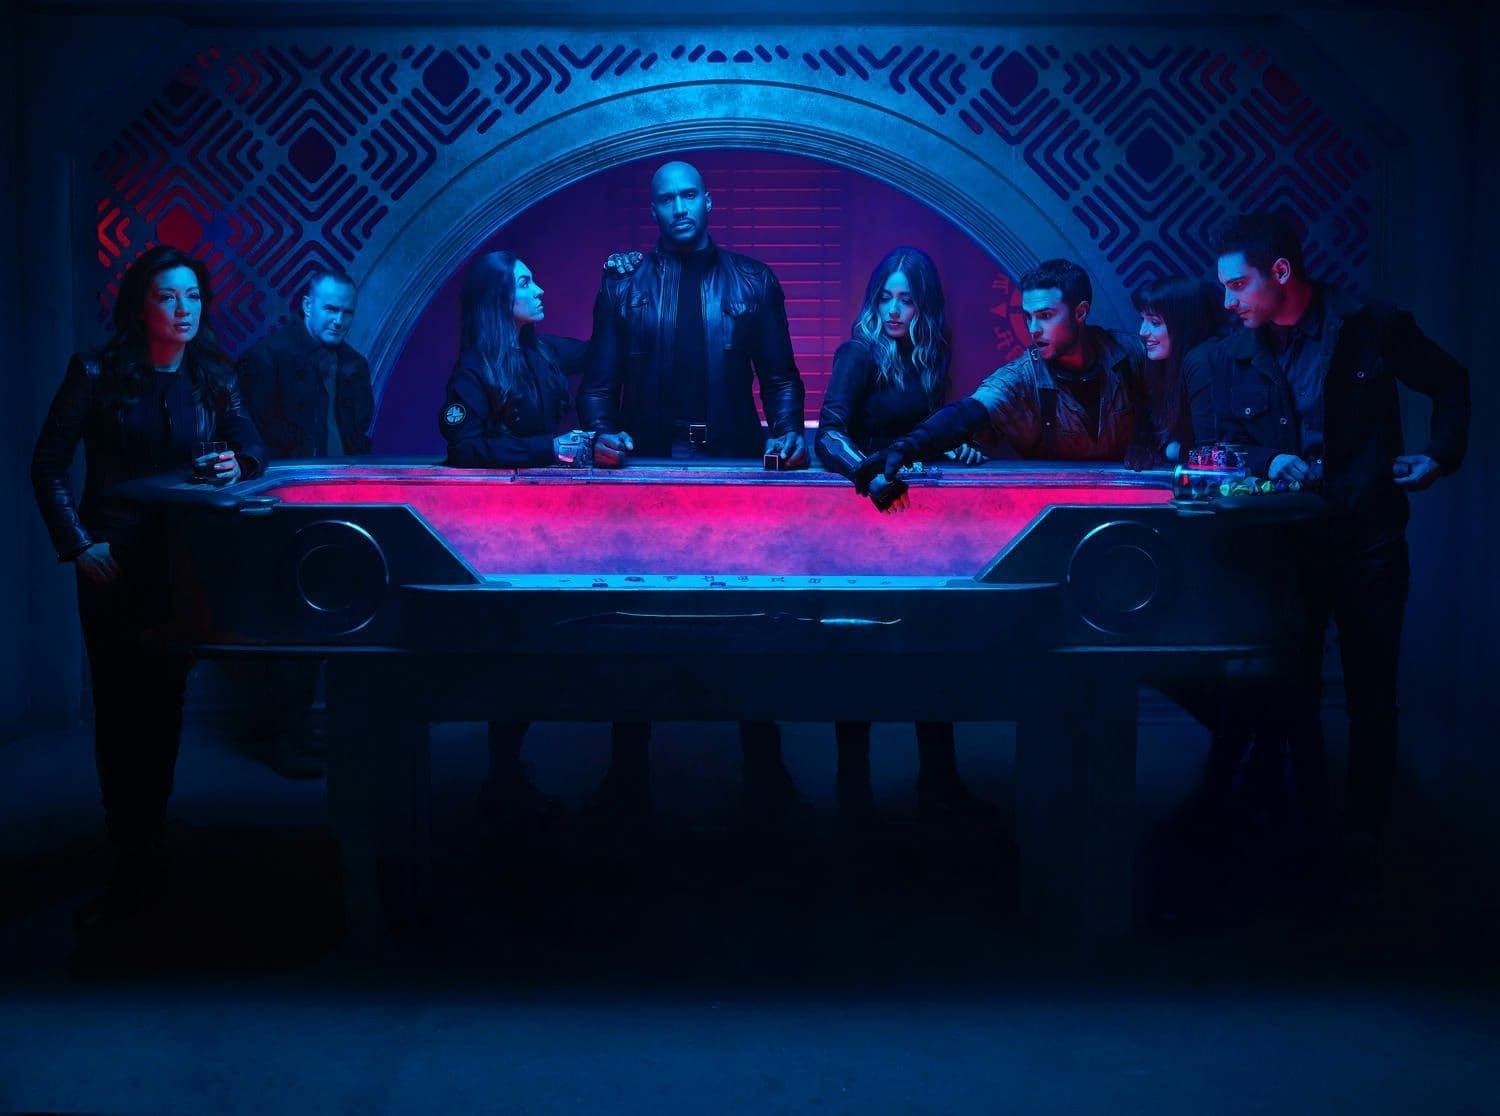 marvel's agents of s.h.i.e.l.d.